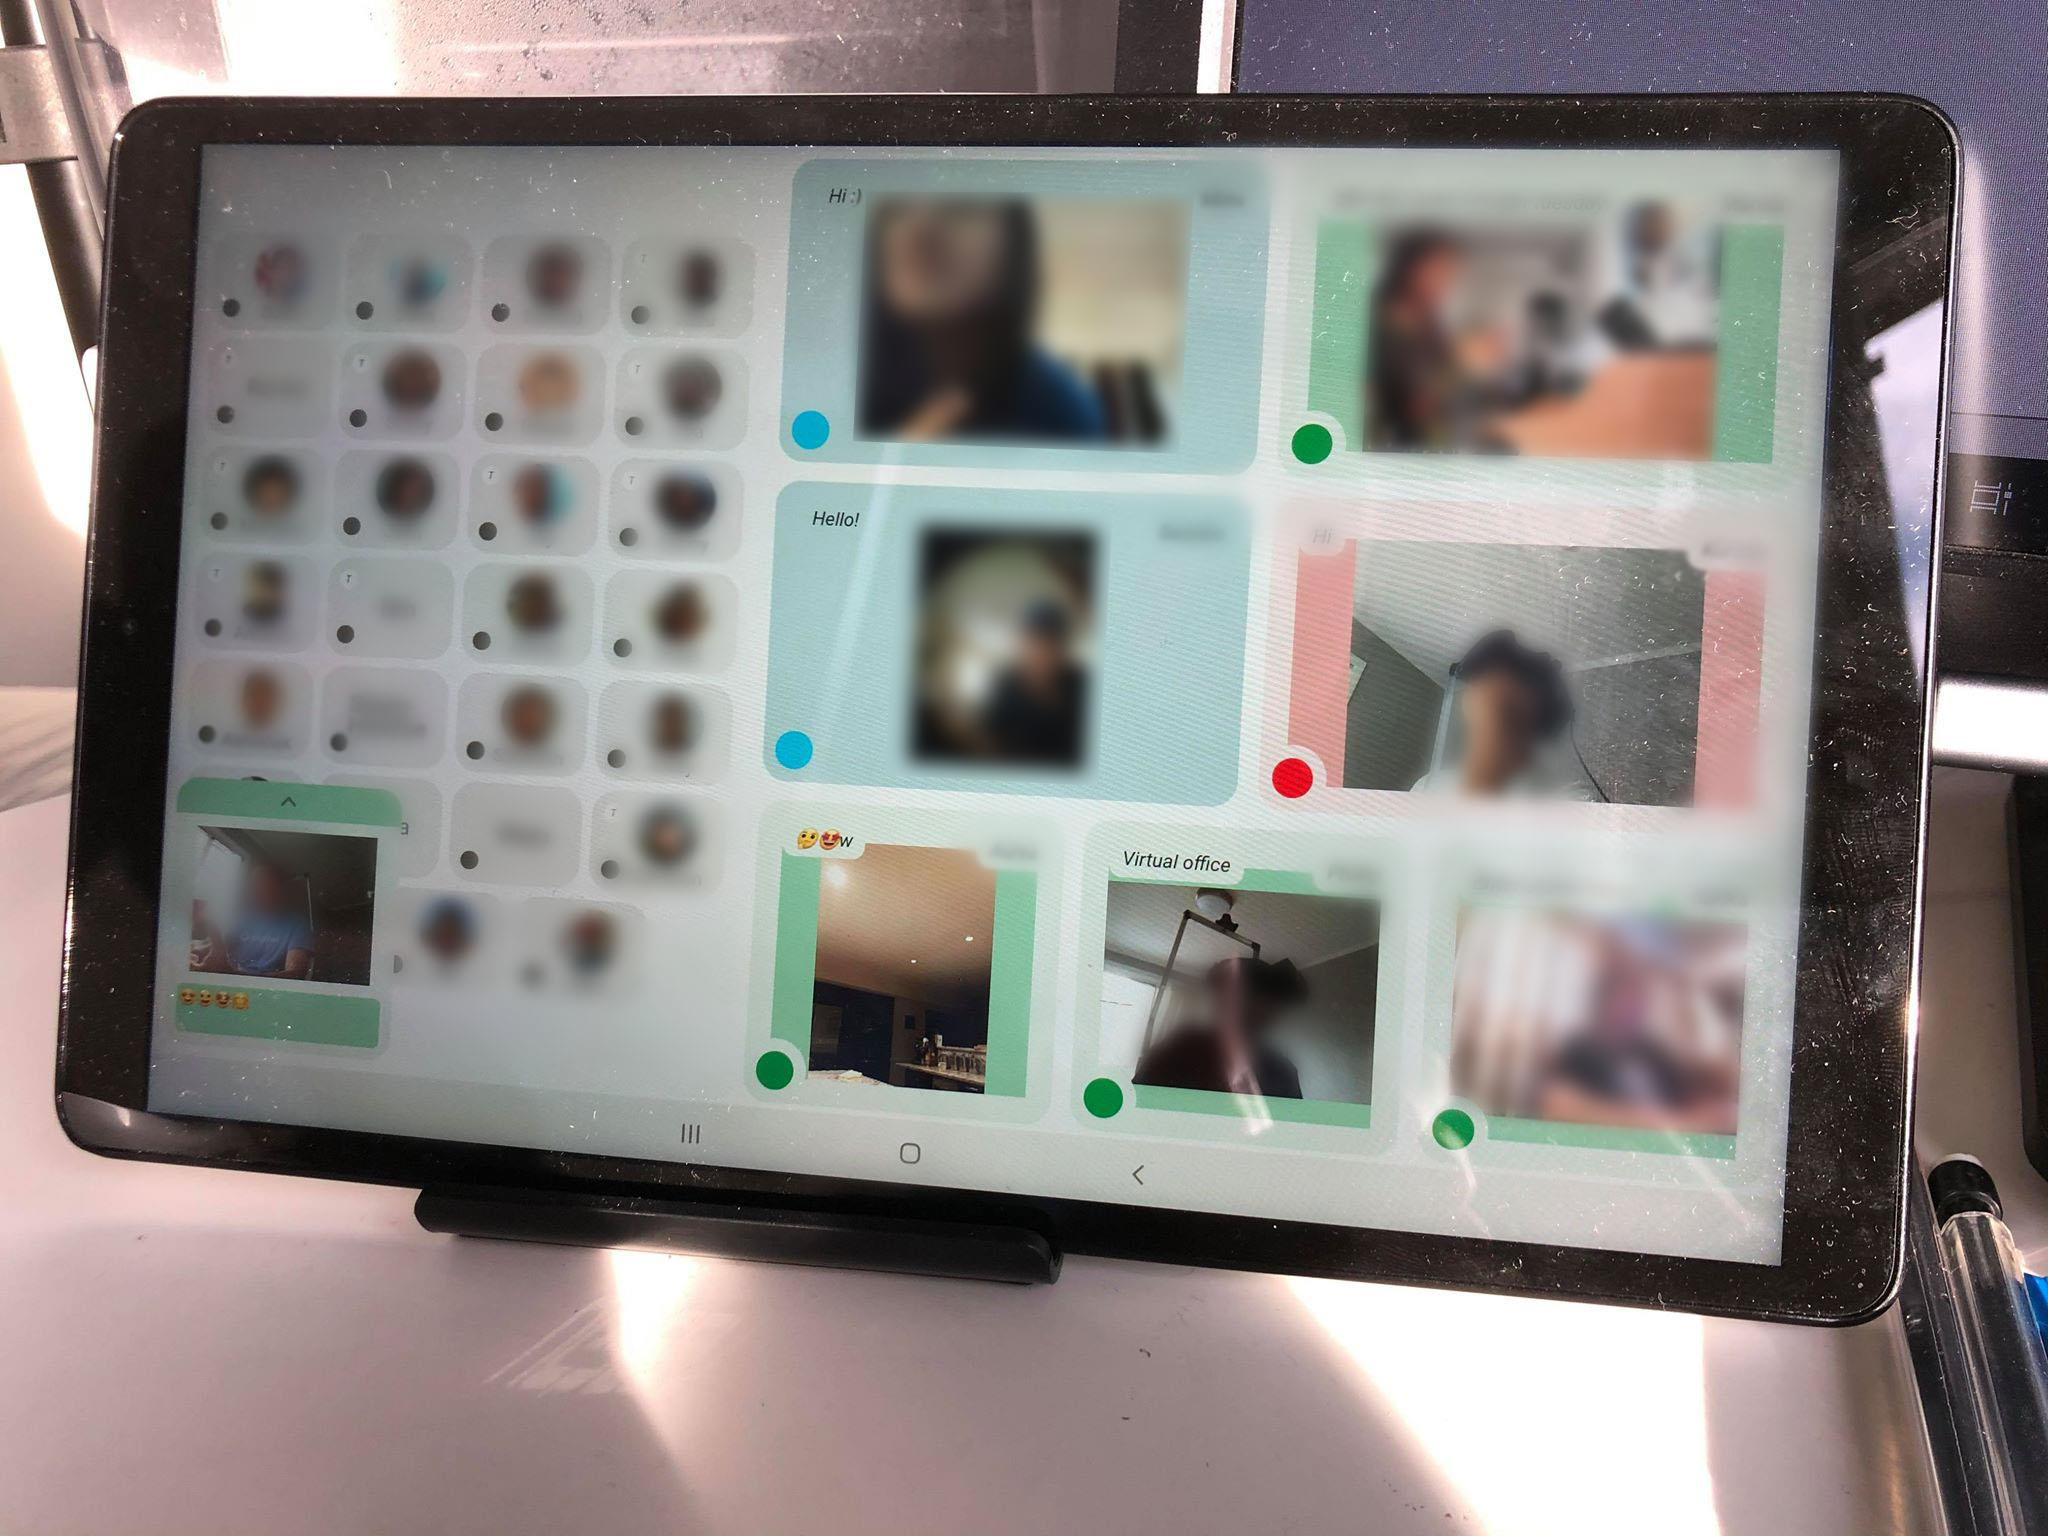 Photo of the tablet in use. Seven video feeds are displayed. Each is of a friend who is on camera and can also see you through the camera on the tablet. Each video has a colored border representing the status of the user. In the photo, four users are green, two are blue and one is red. There are also a number of gray regions with profile pictures depicting users who are offline. The photo is heavily blurred to protect the privacy of the users in the photo.